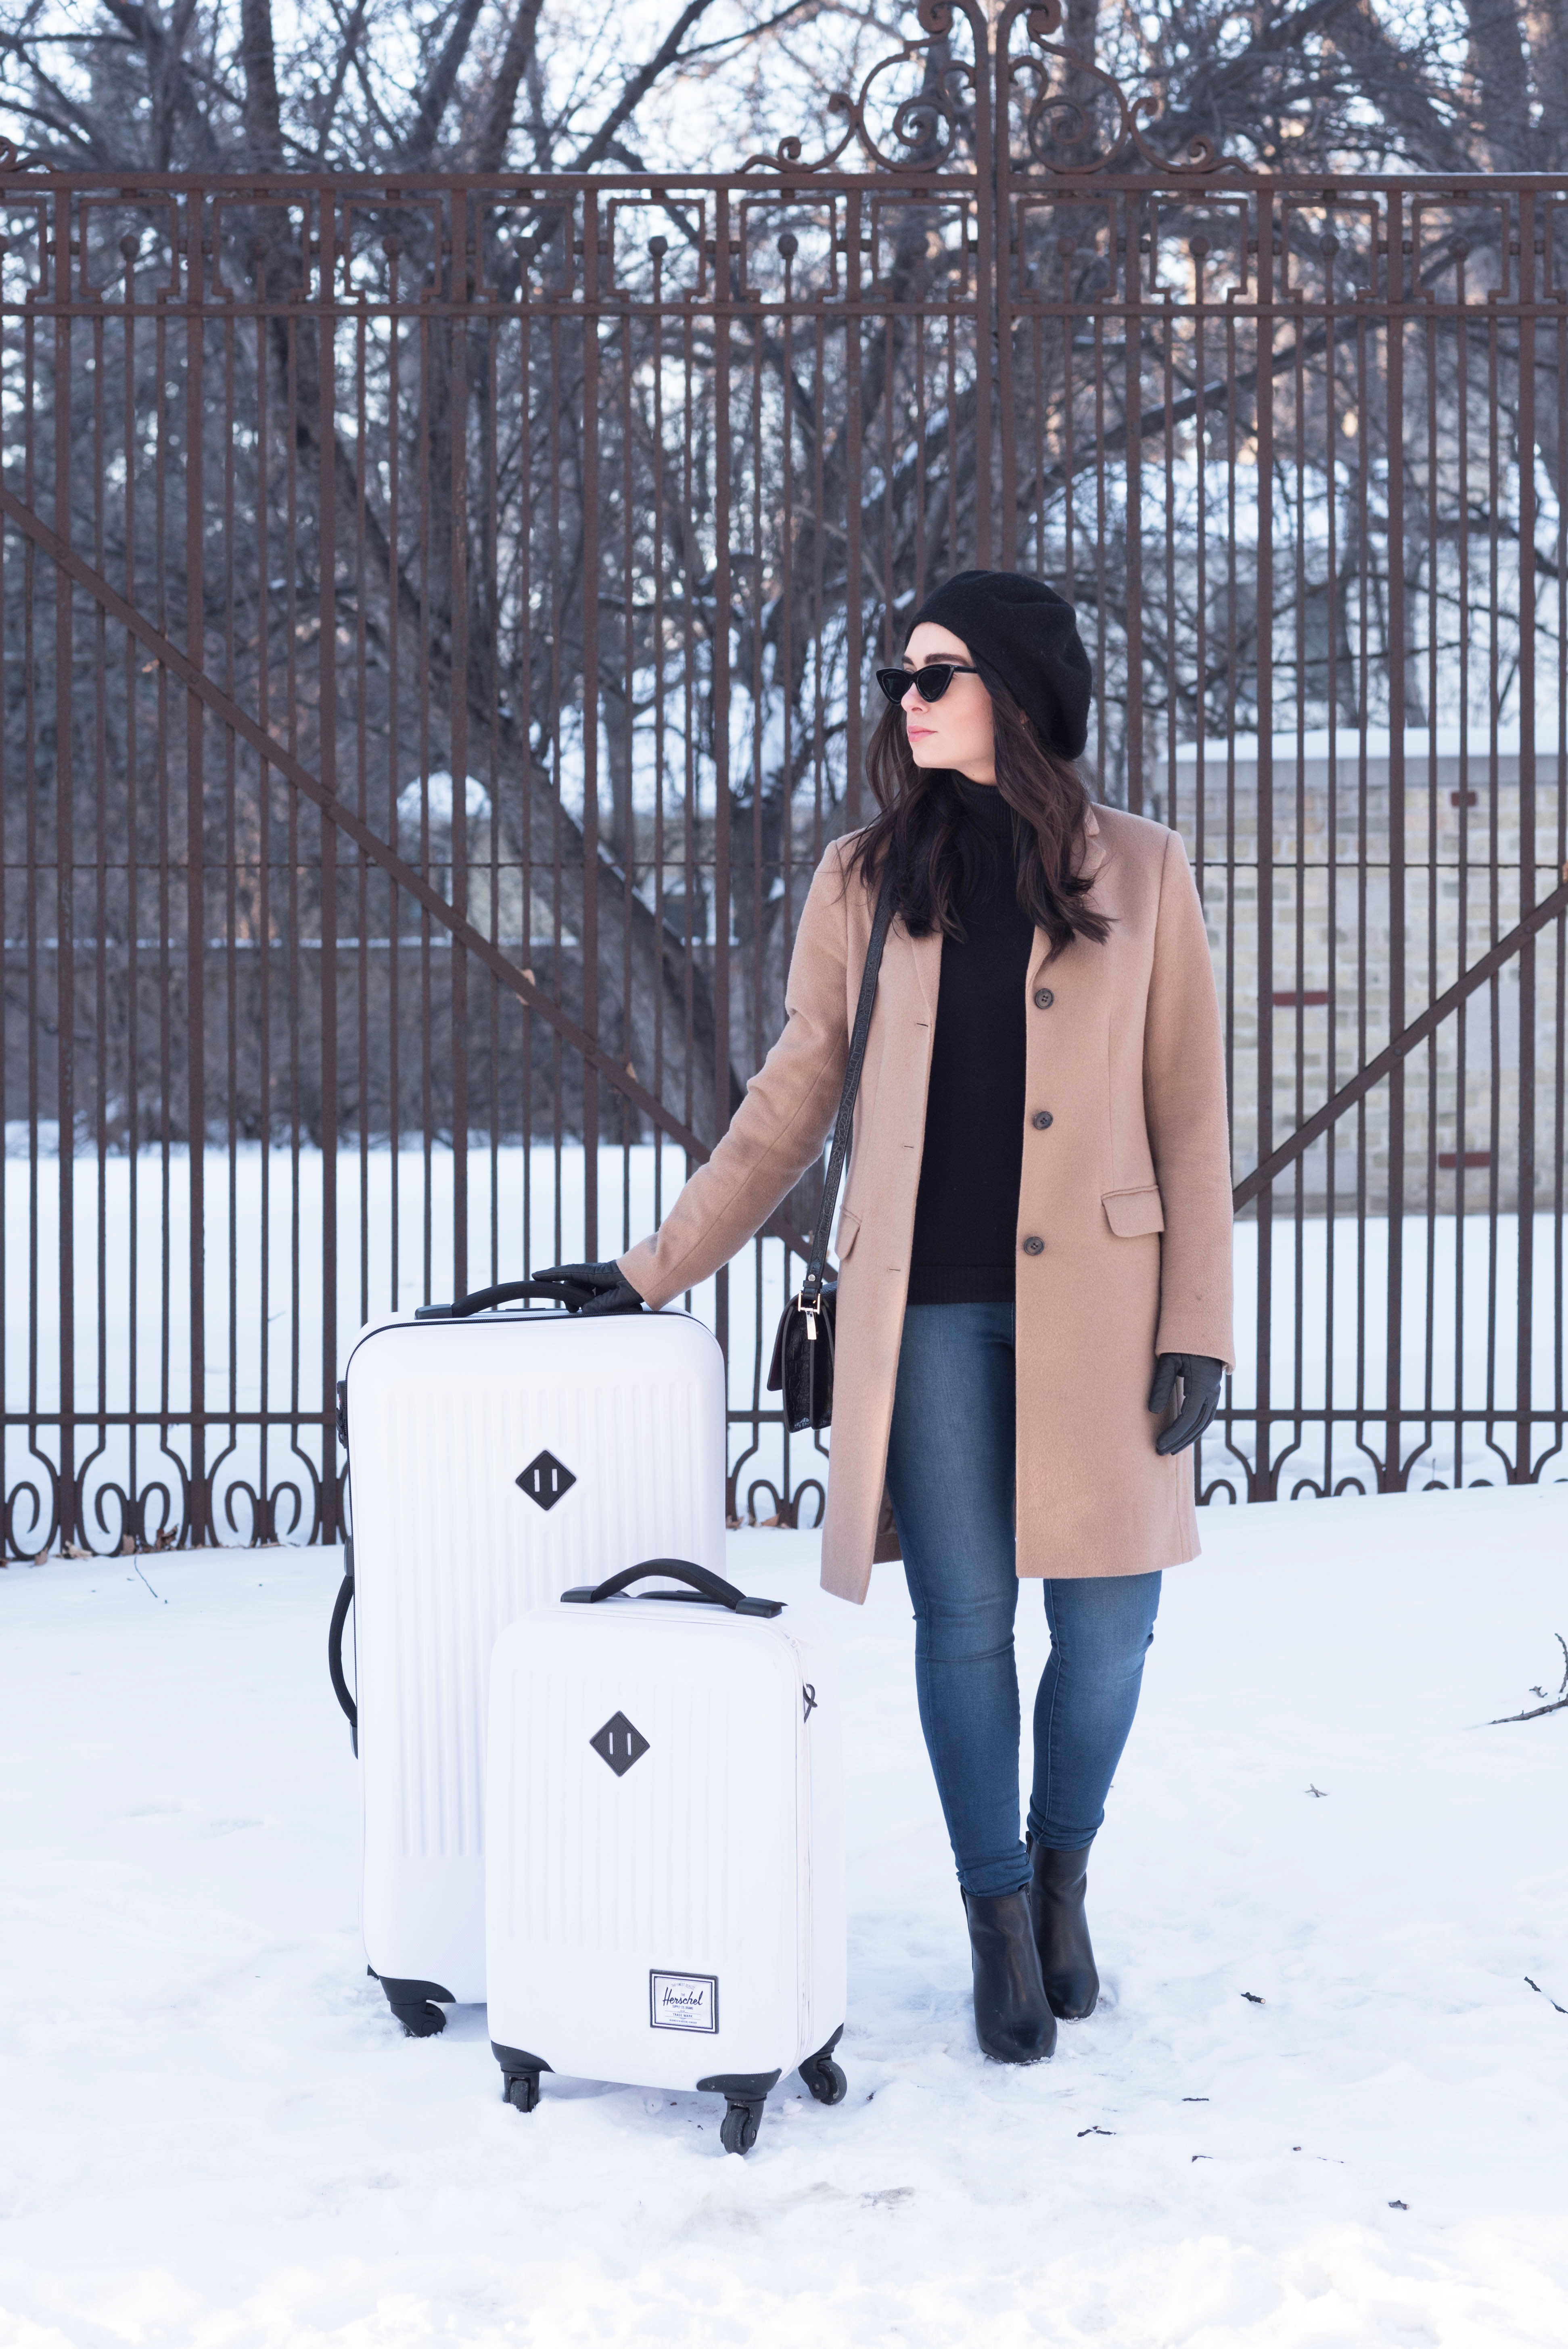 Fashion blogger Cee Fardoe of Coco & Vera stands in the snow next to her white Herschel Supply Co suitcases wearing a Uniqlo camel coat and Mott & Bow jeans